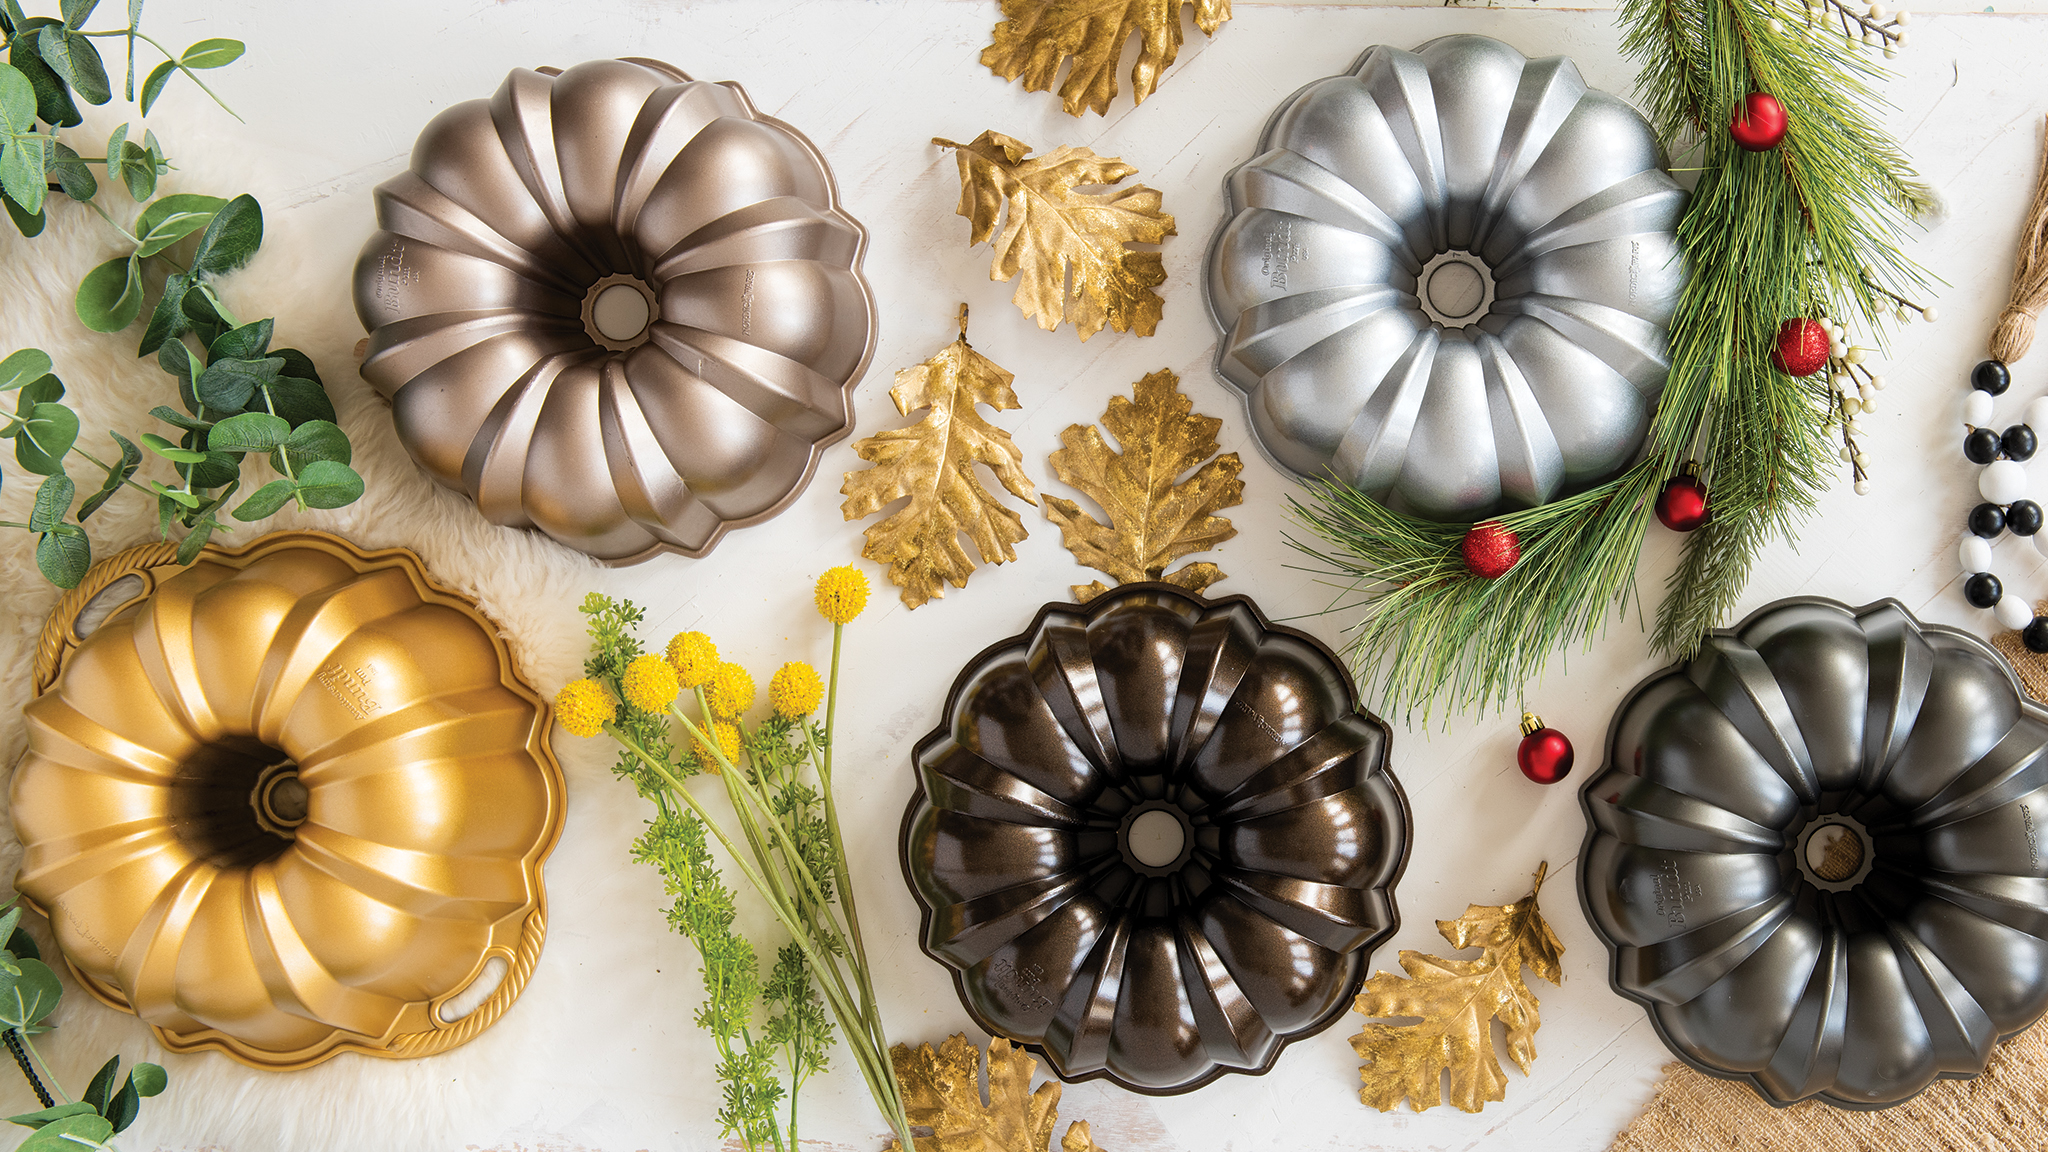 Bundt® Tips and Tricks, How to Bake the Perfect Bundt®